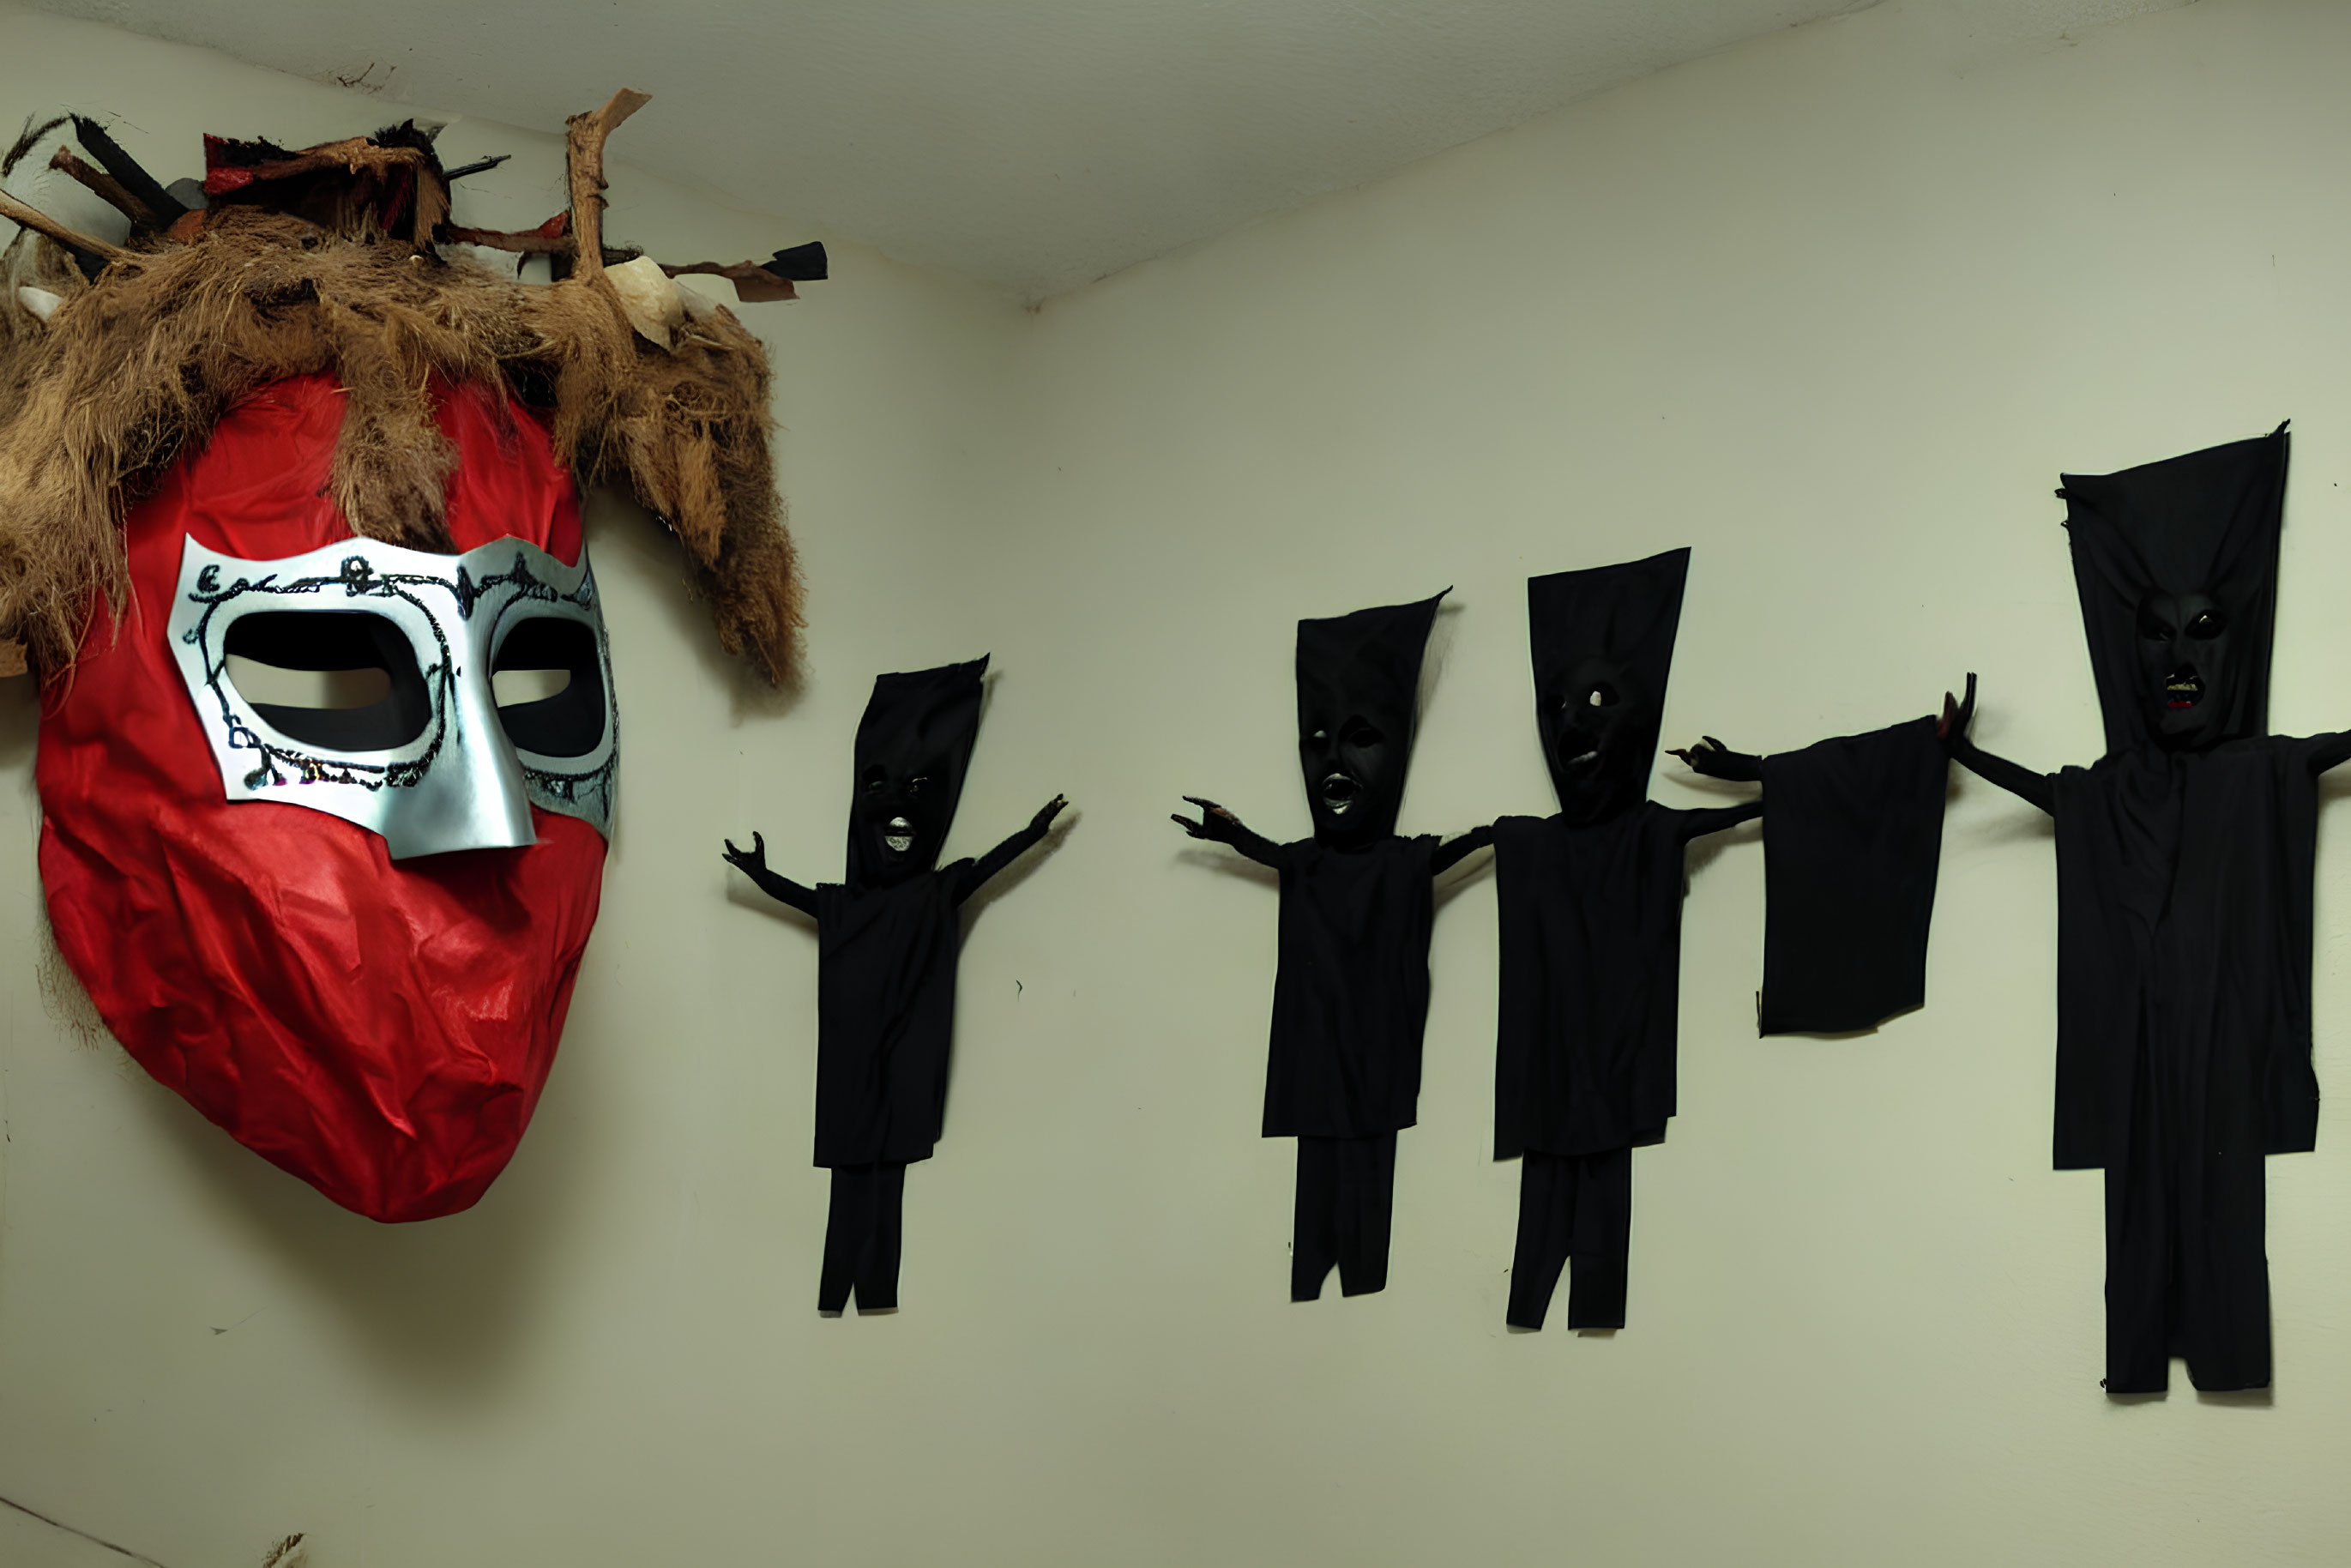 Large red and white mask on wall with small black figures against light background